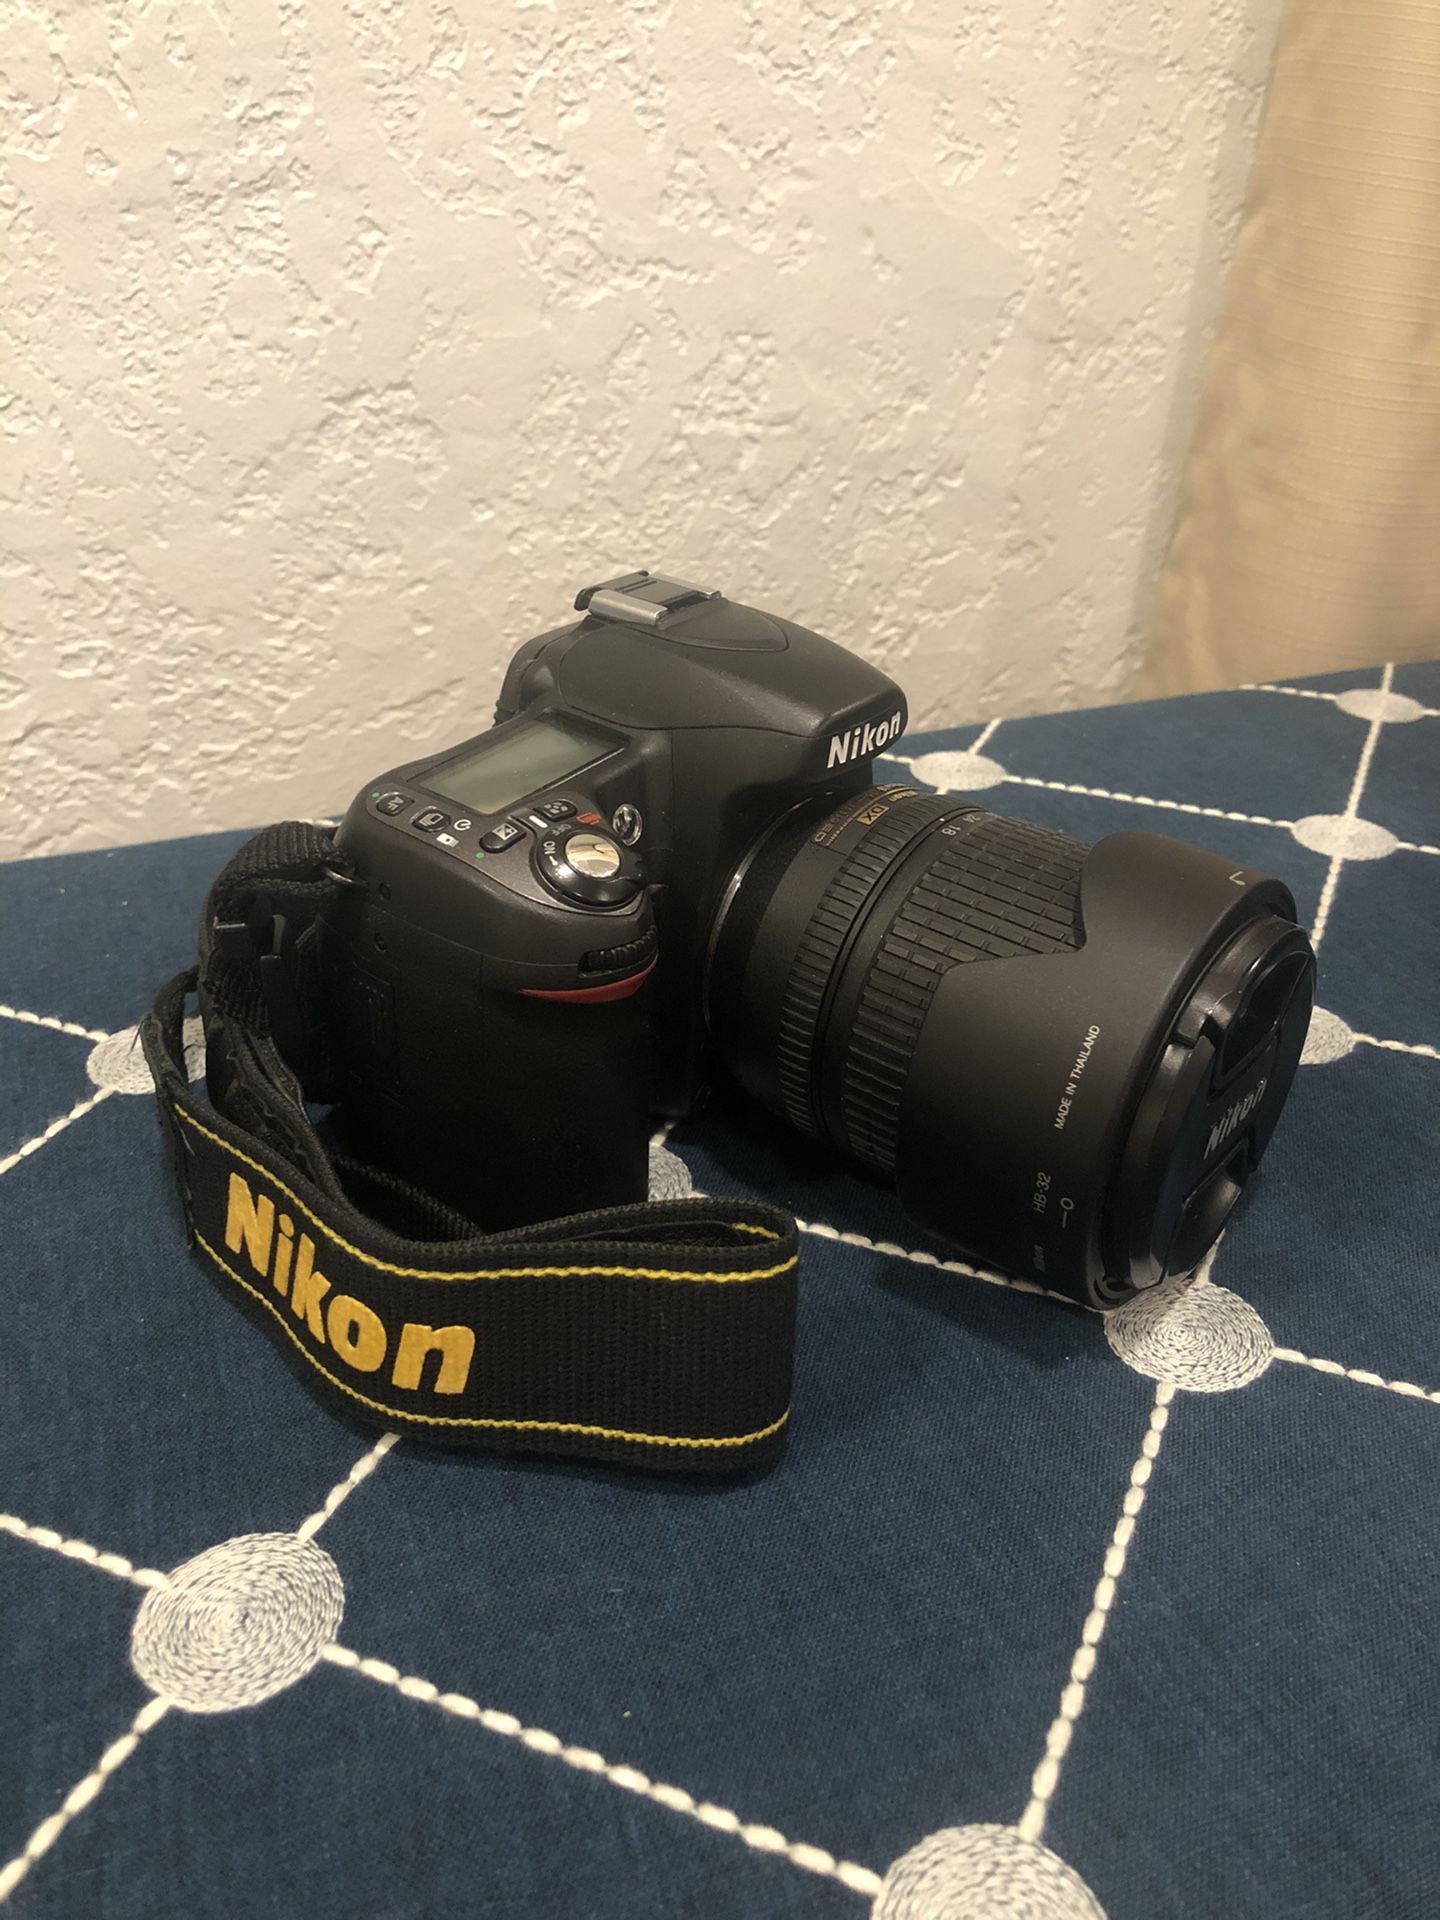 Nikon D80 Camera with Lens, Battery, Charger & Bag